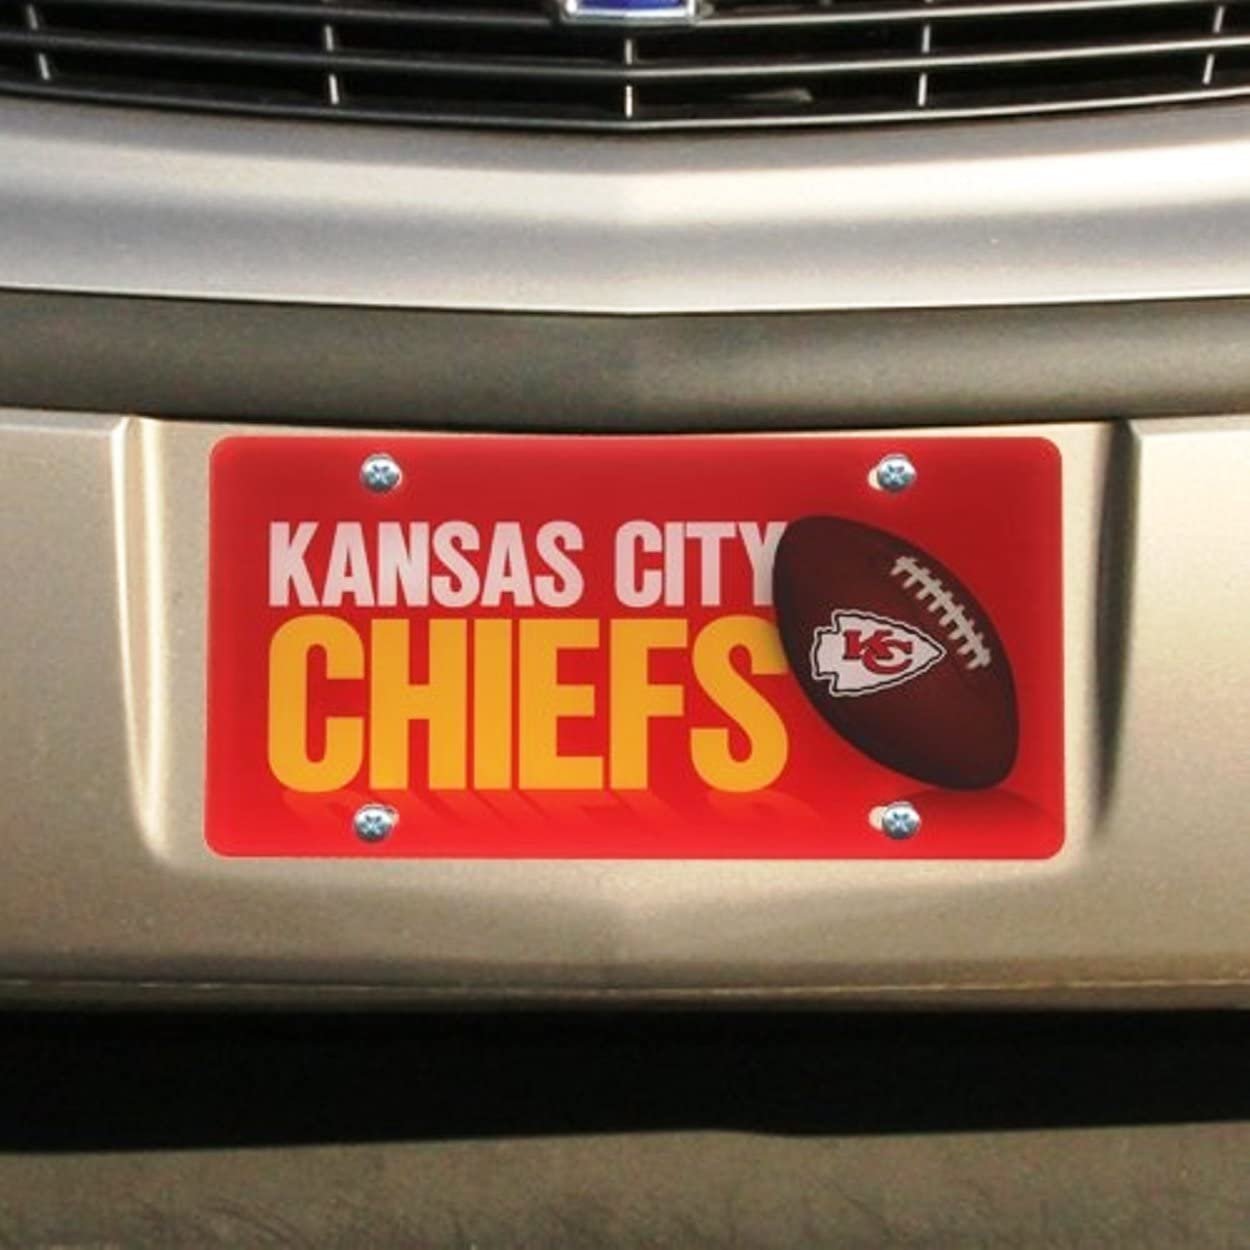 Kansas City Chiefs Laser Tag License Plate, Acrylic, Printed Design, 6x12 Inch